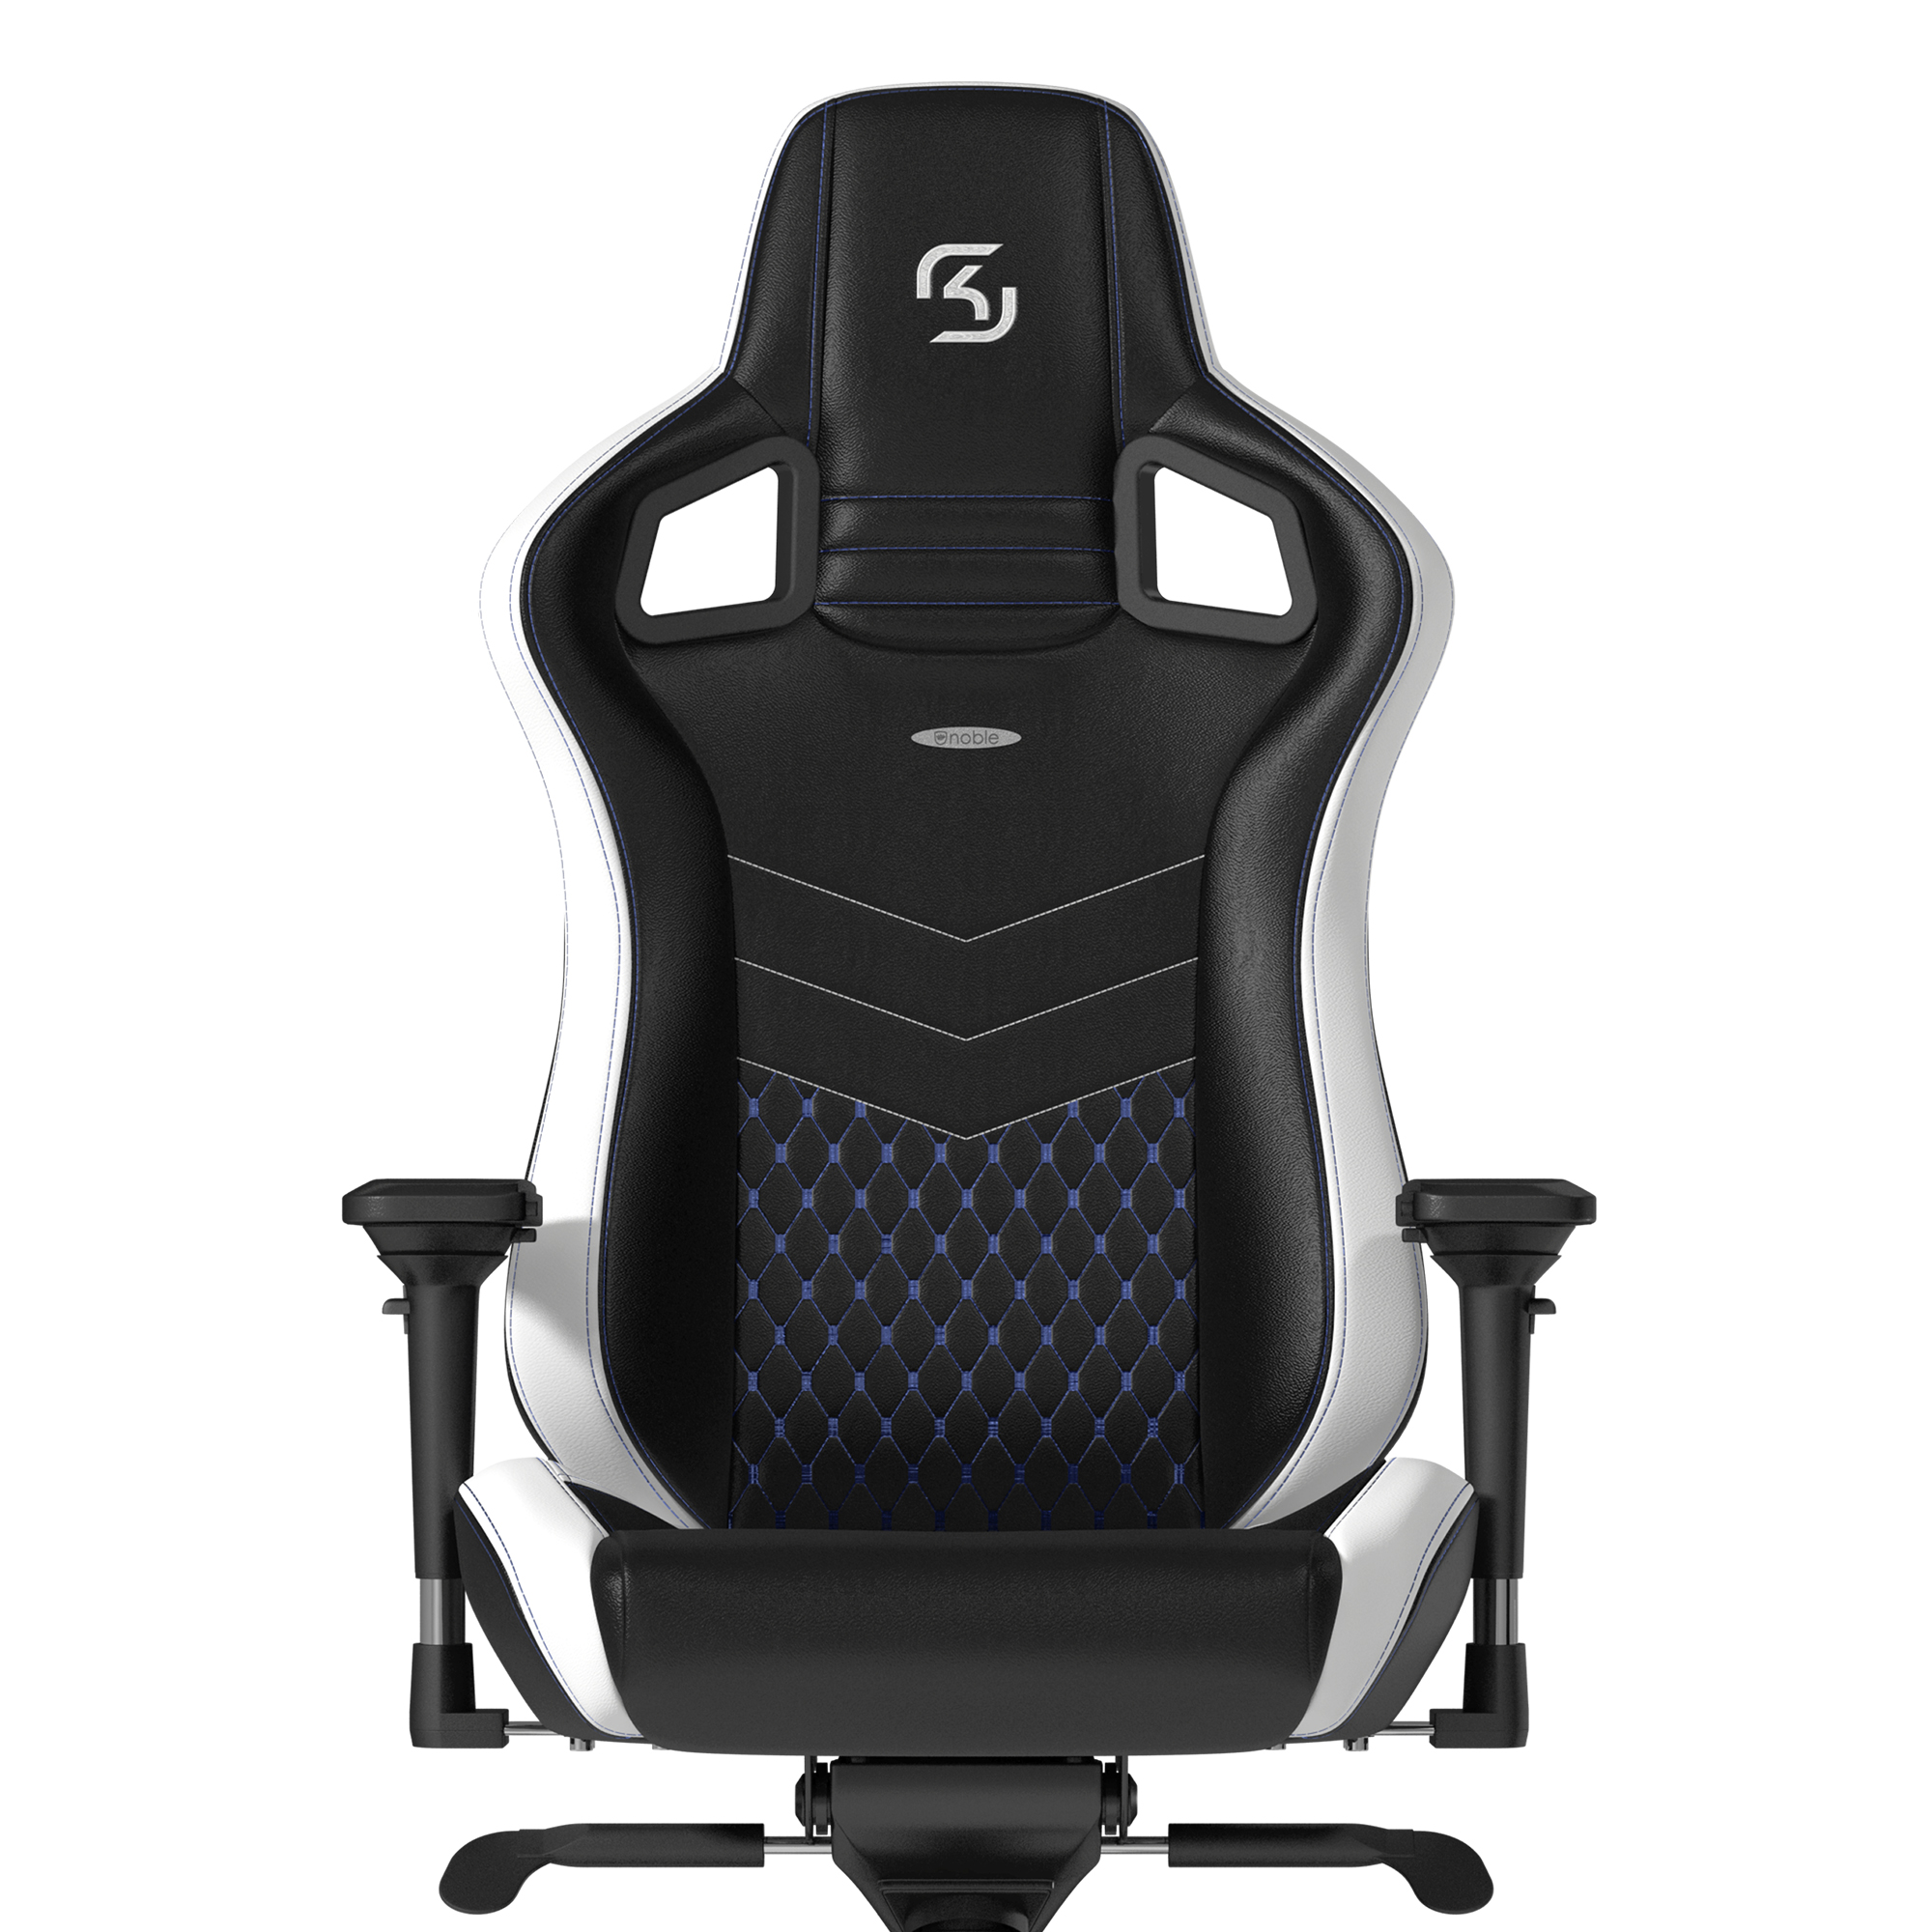 noblechairs - noblechairs EPIC Gaming Chair - SK Gaming Edition